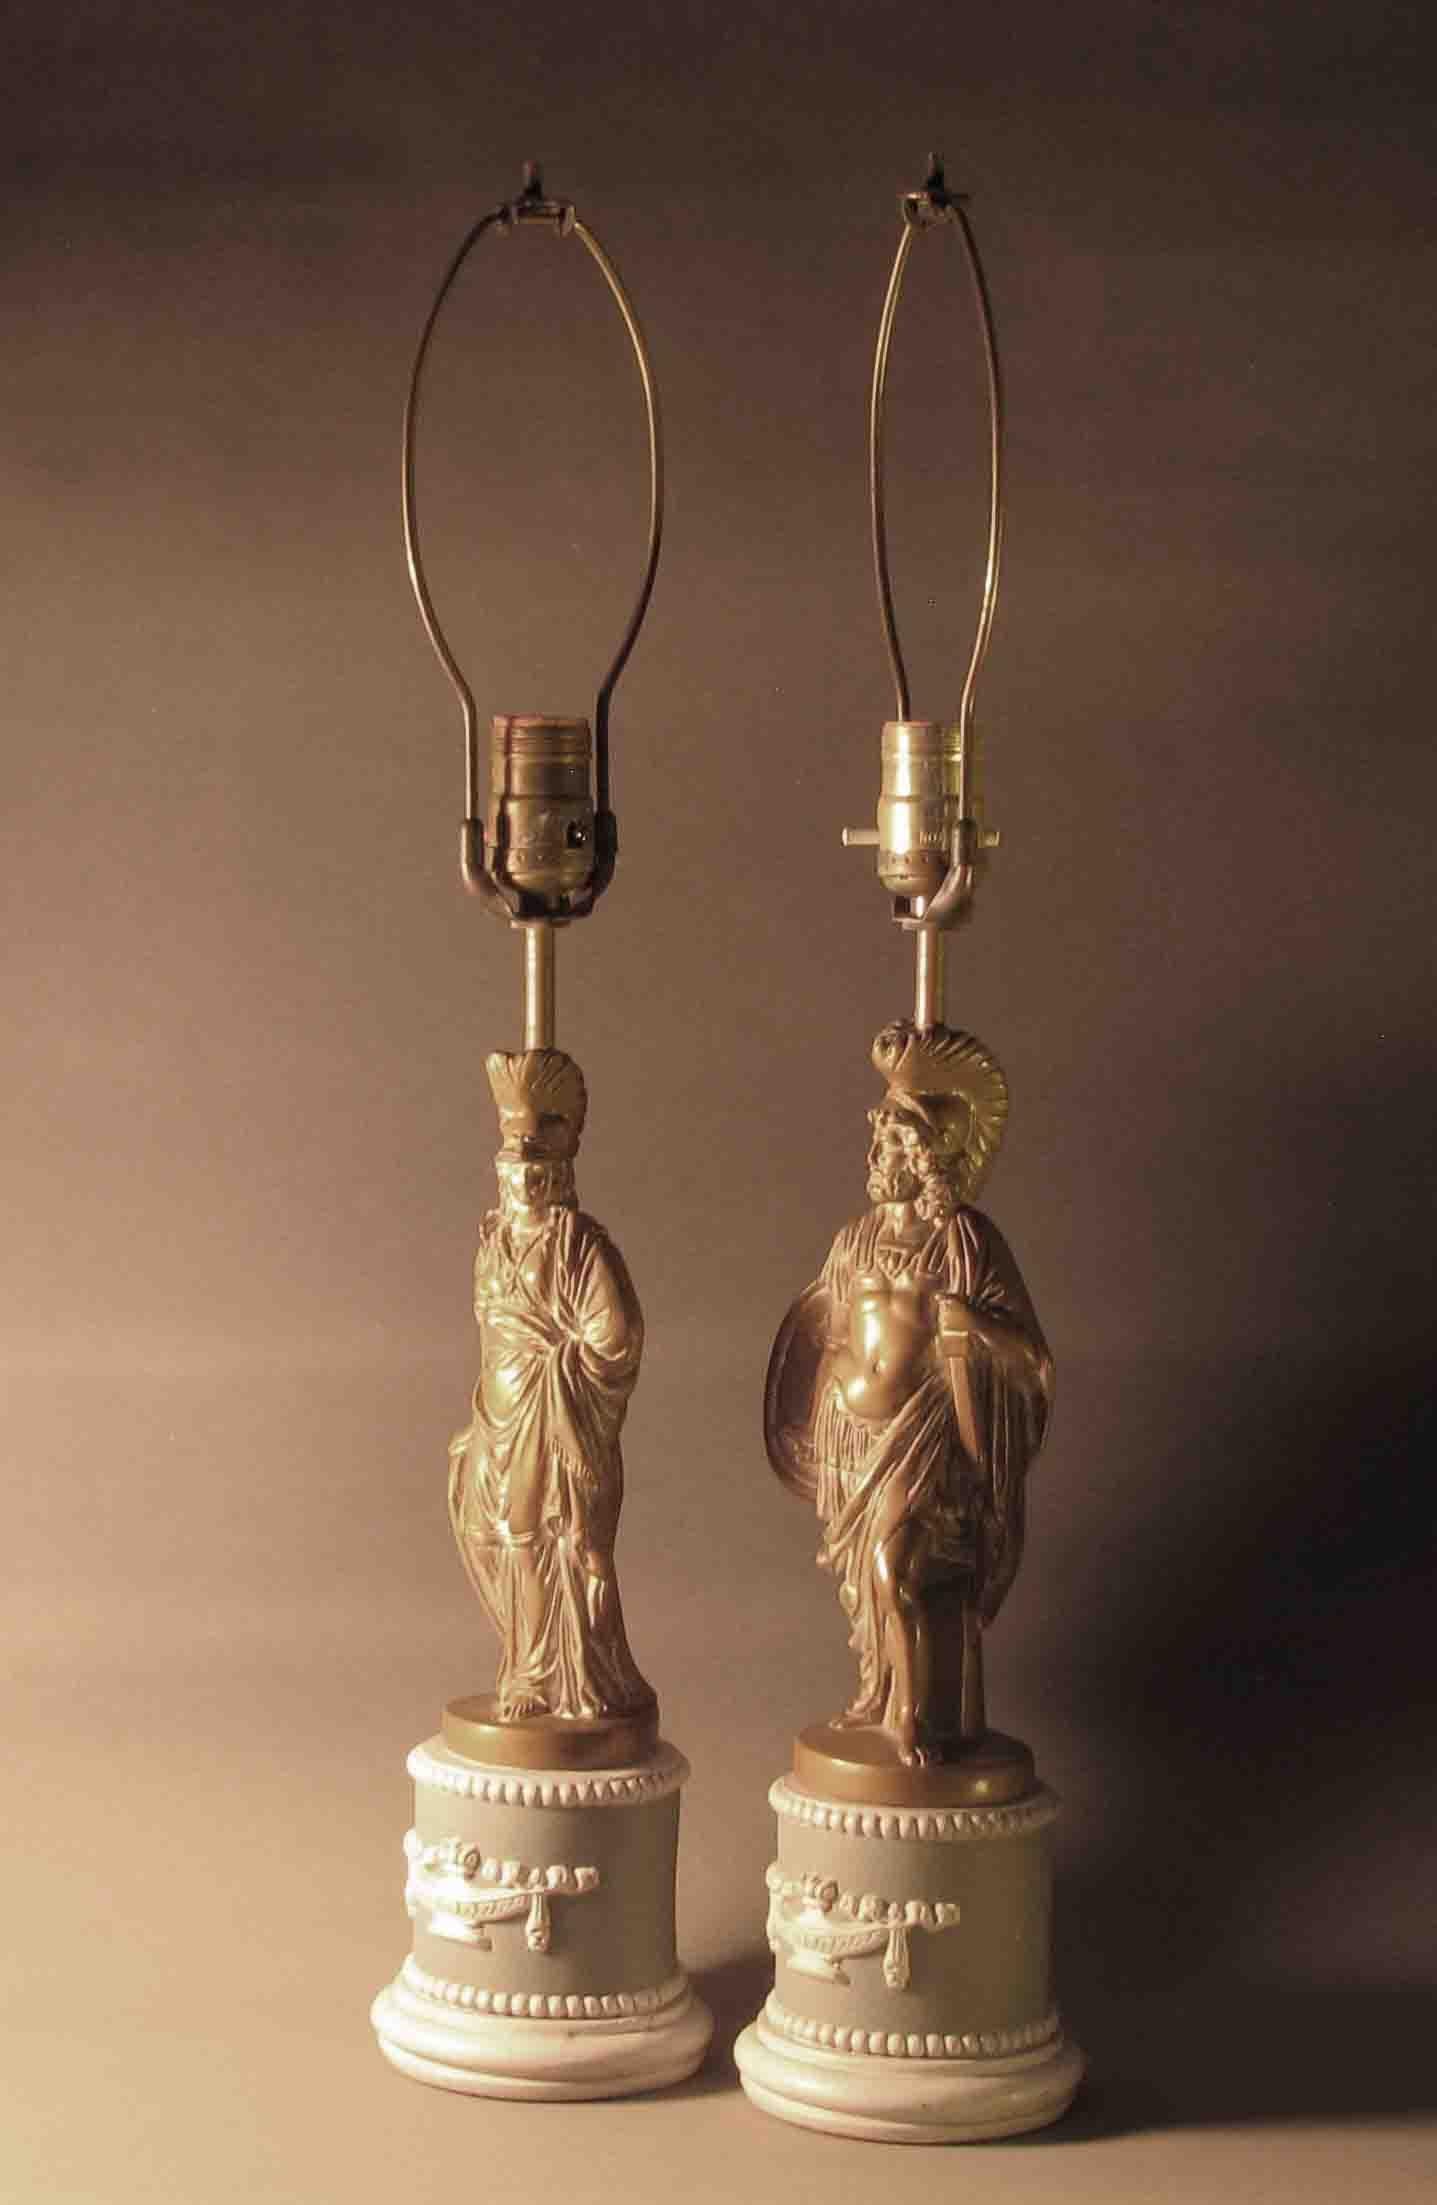 Hand-Crafted Pair of Patinated Plaster Neoclassical Figural Table Lamps by Sculptureline N.Y. For Sale